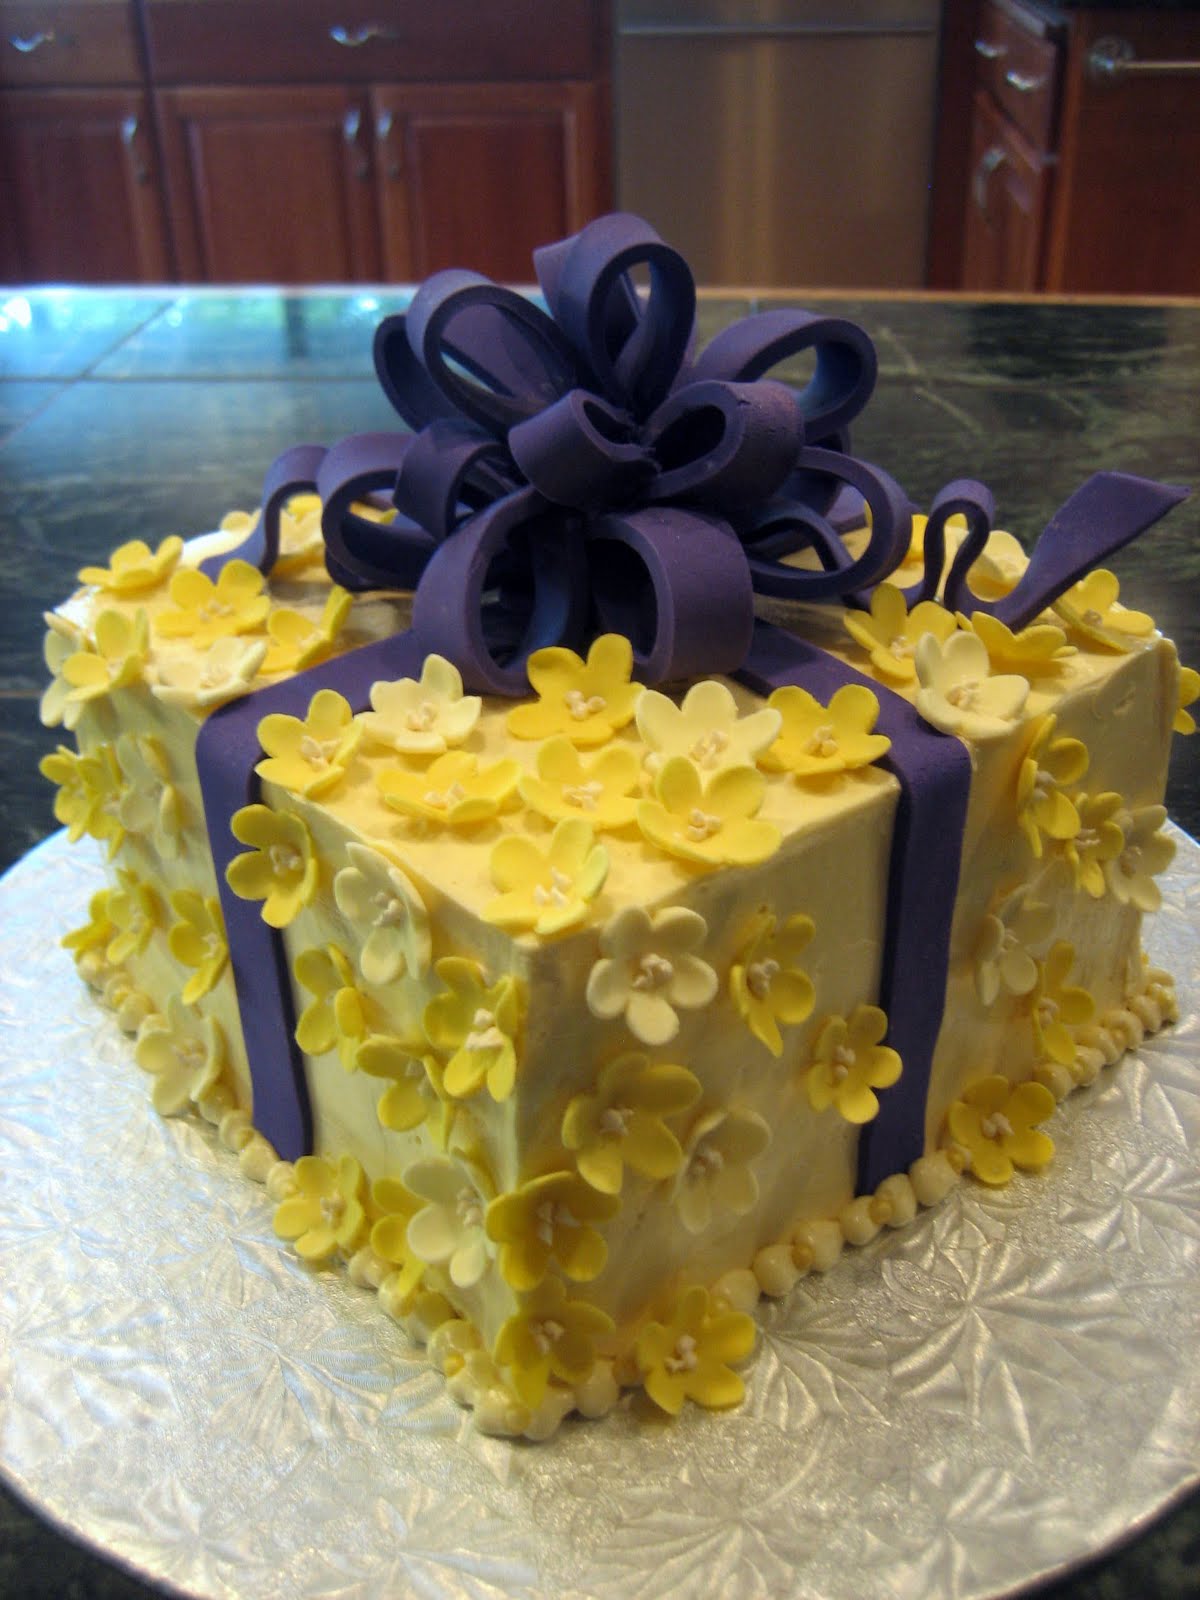 Jillicious Discoveries: Surprise Birthday Gift Cake (And Yes, A Little More  Purple)